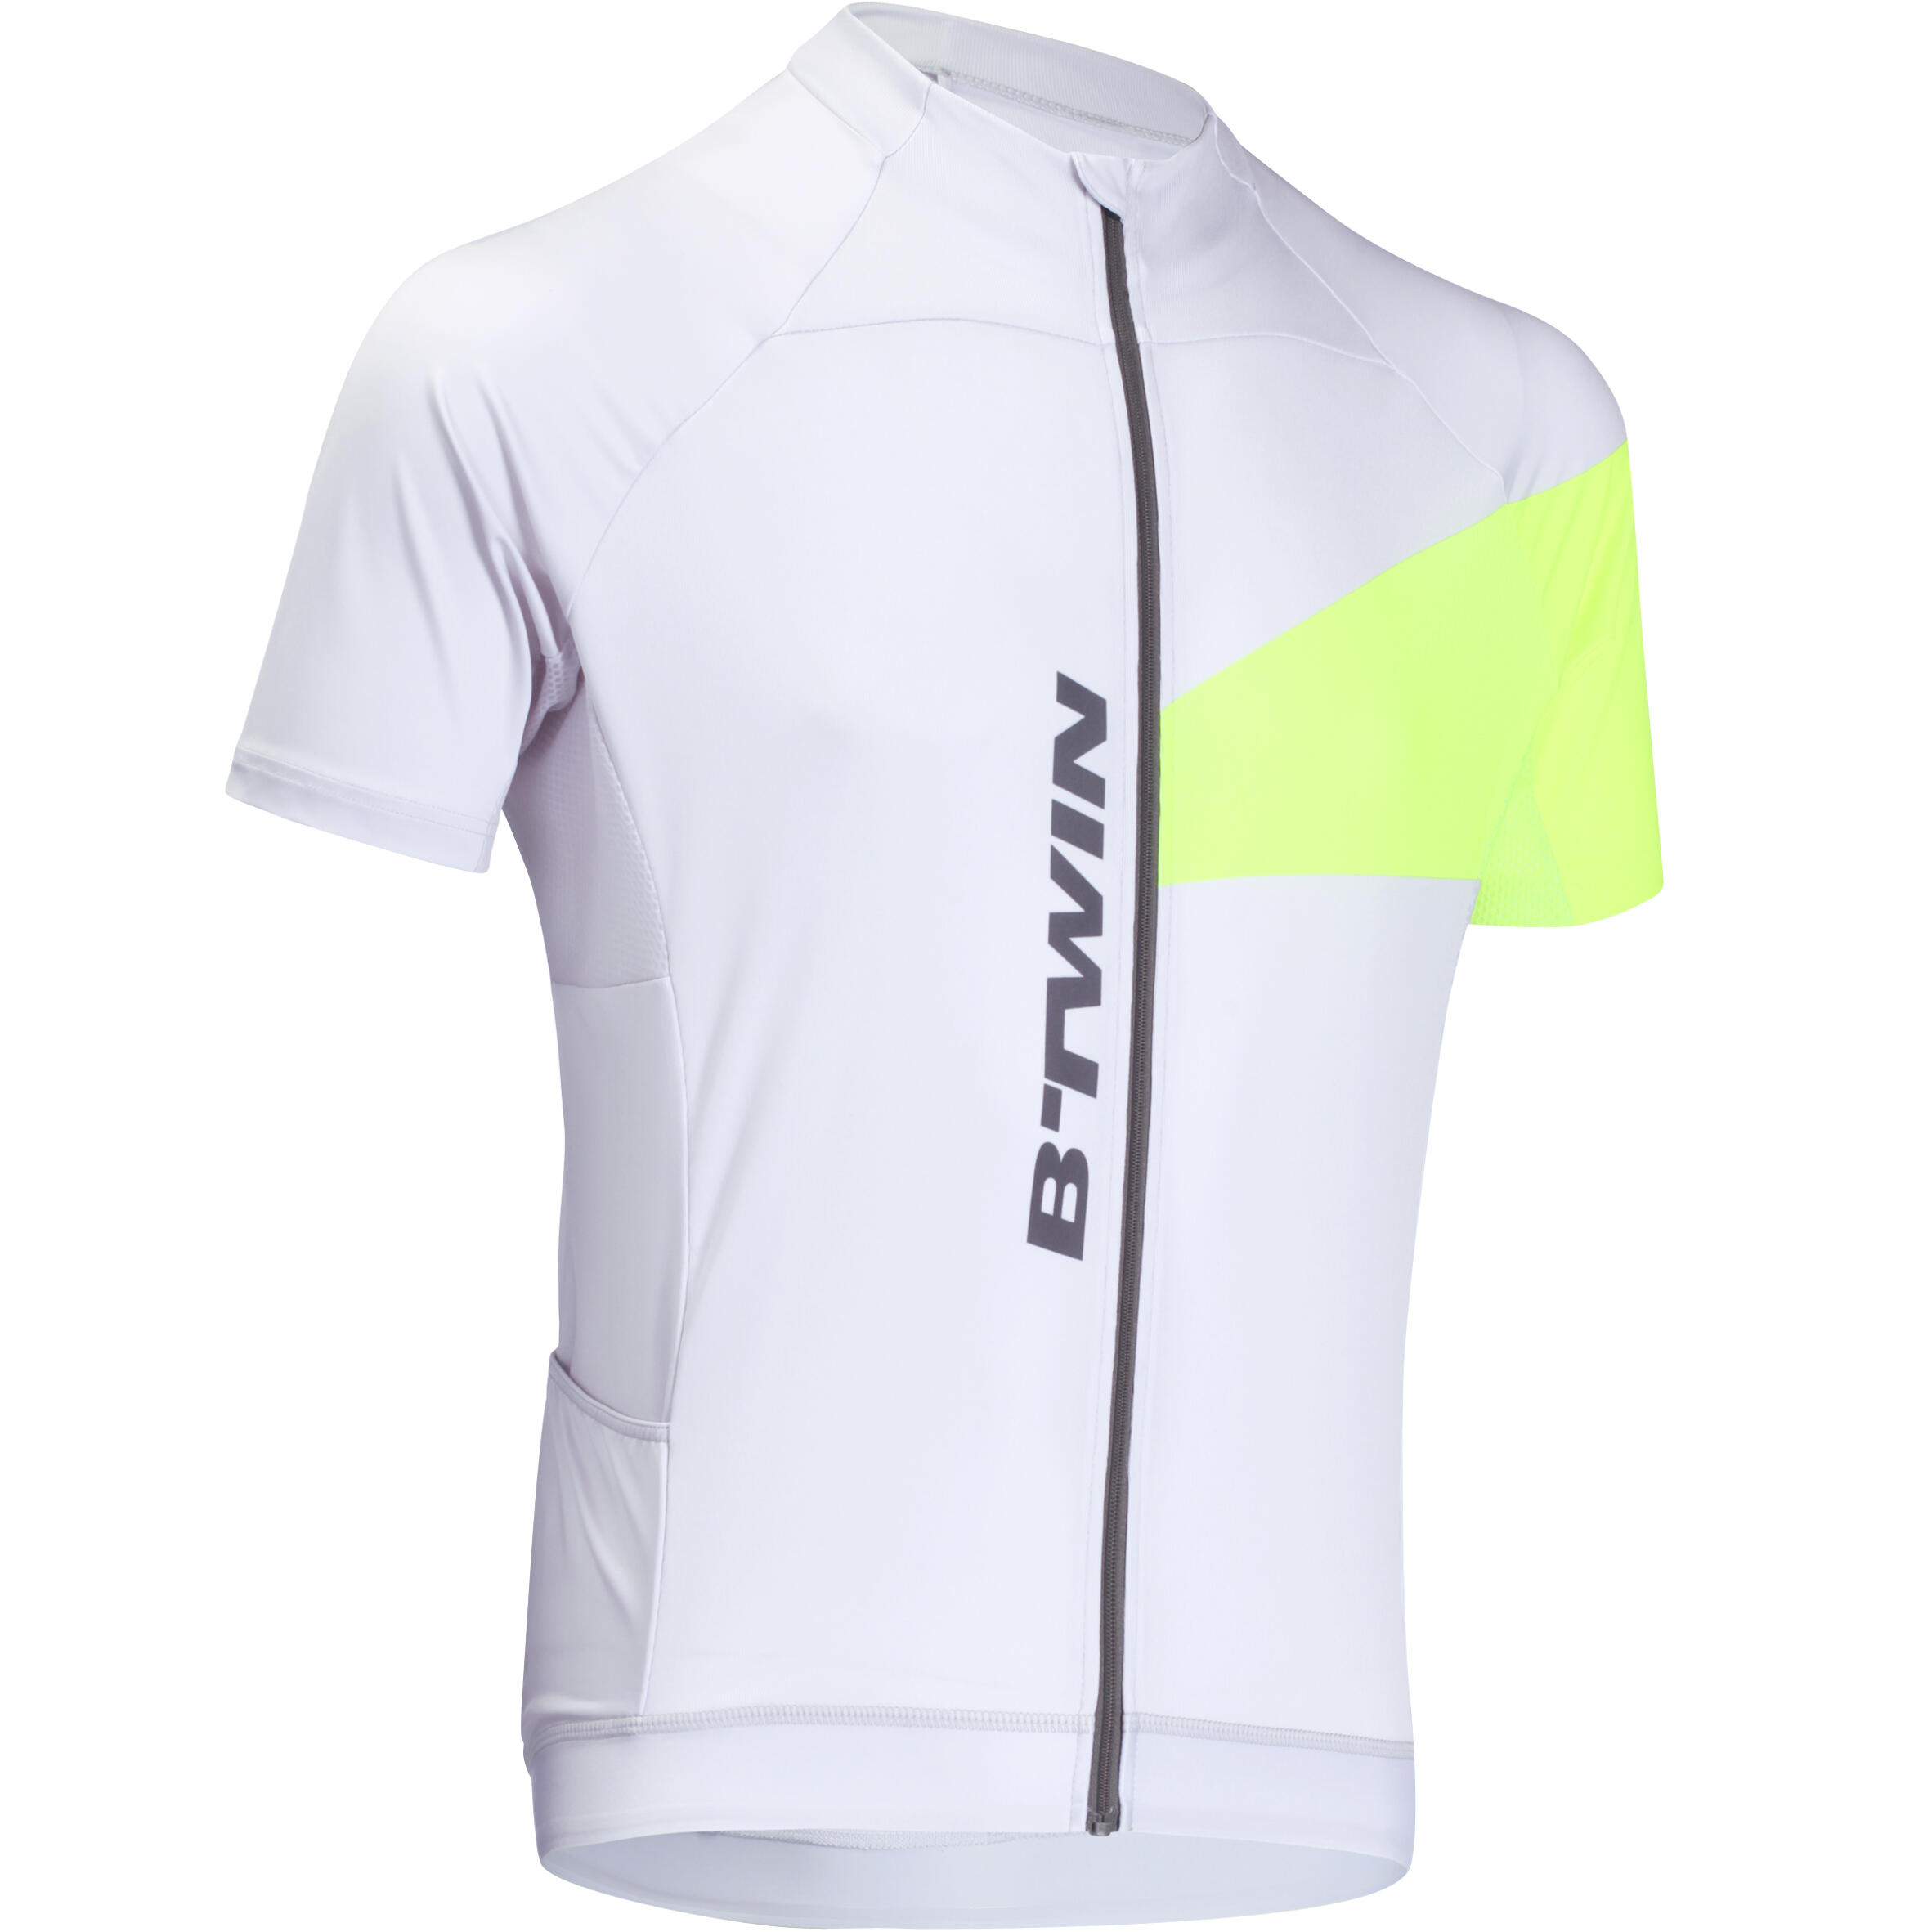 BTWIN 700 Short-Sleeved Cycling Jersey - Grey/Yellow